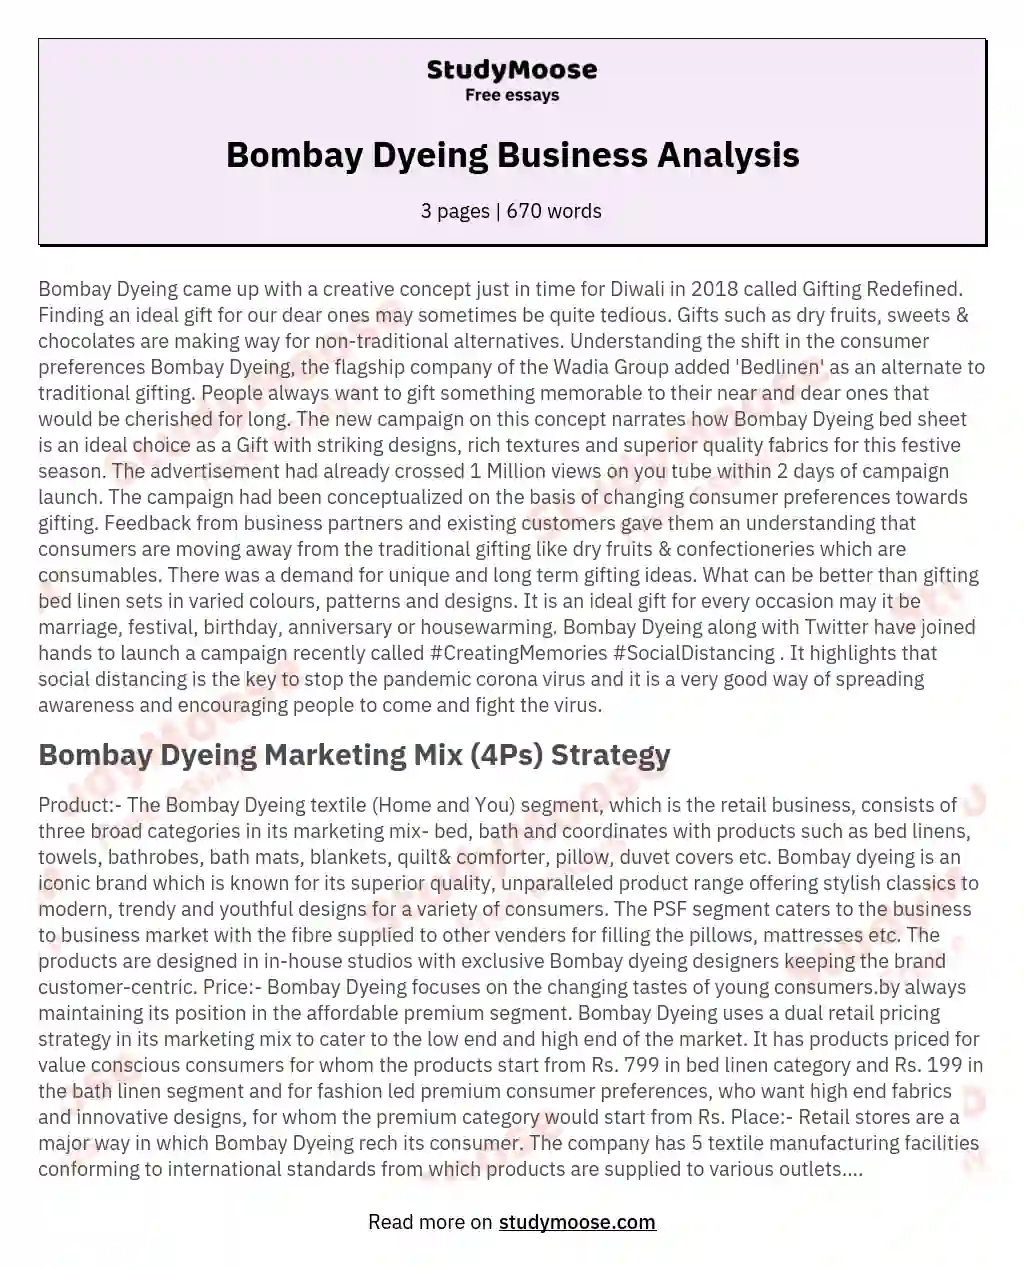 Bombay Dyeing Business Analysis essay